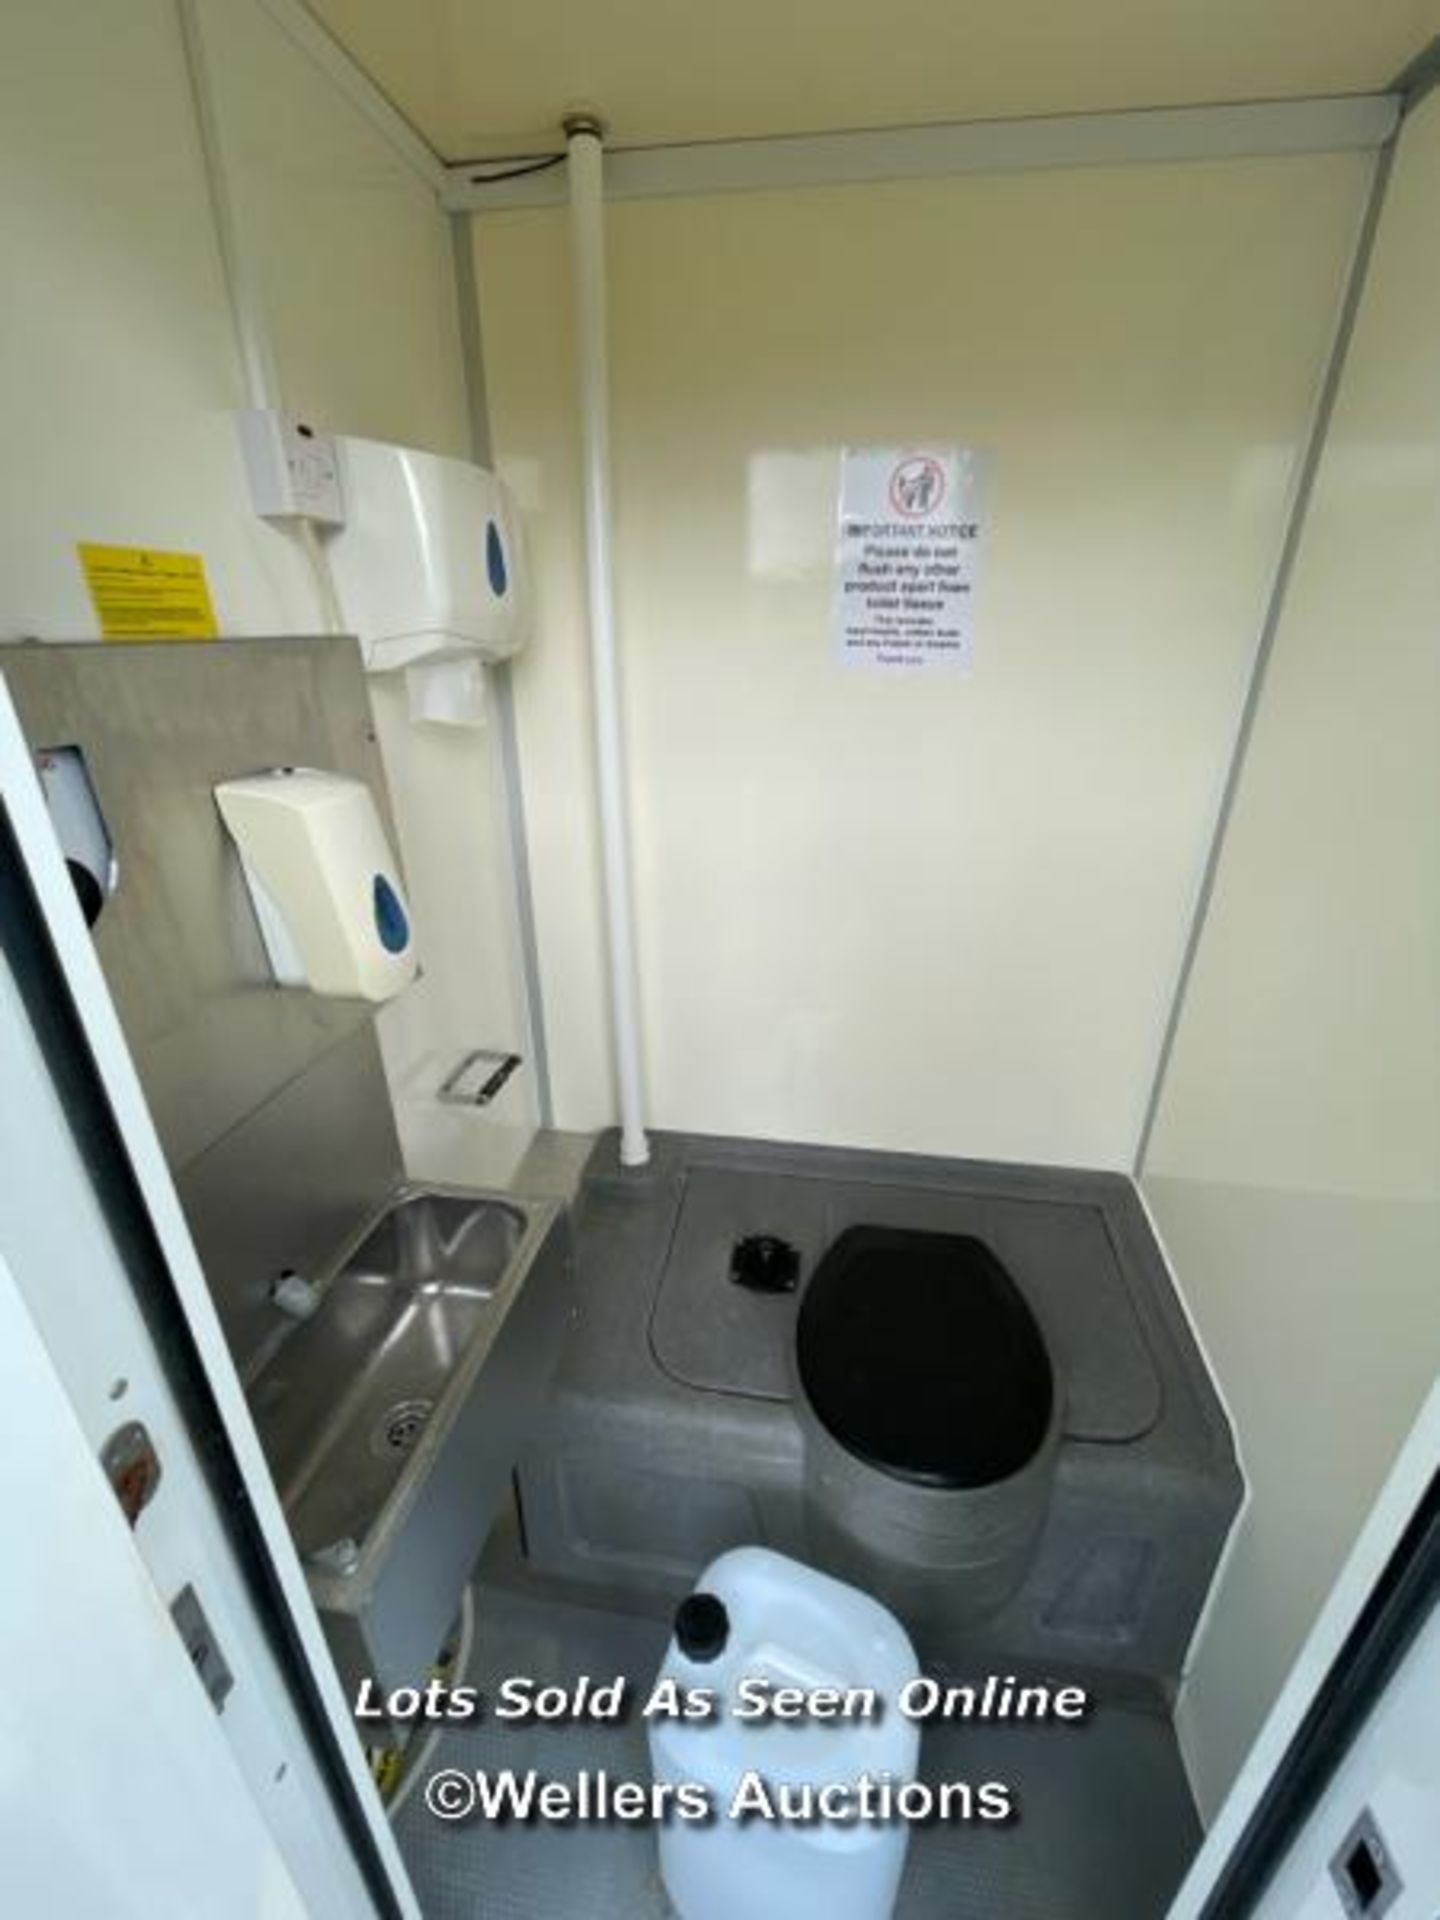 6 PERSON 12 X 7.5FT AJC EASY CABIN TOWABLE WELFARE UNIT, INCLUDES WASH BASIN, KETTLE, MICROWAVE, - Image 11 of 20